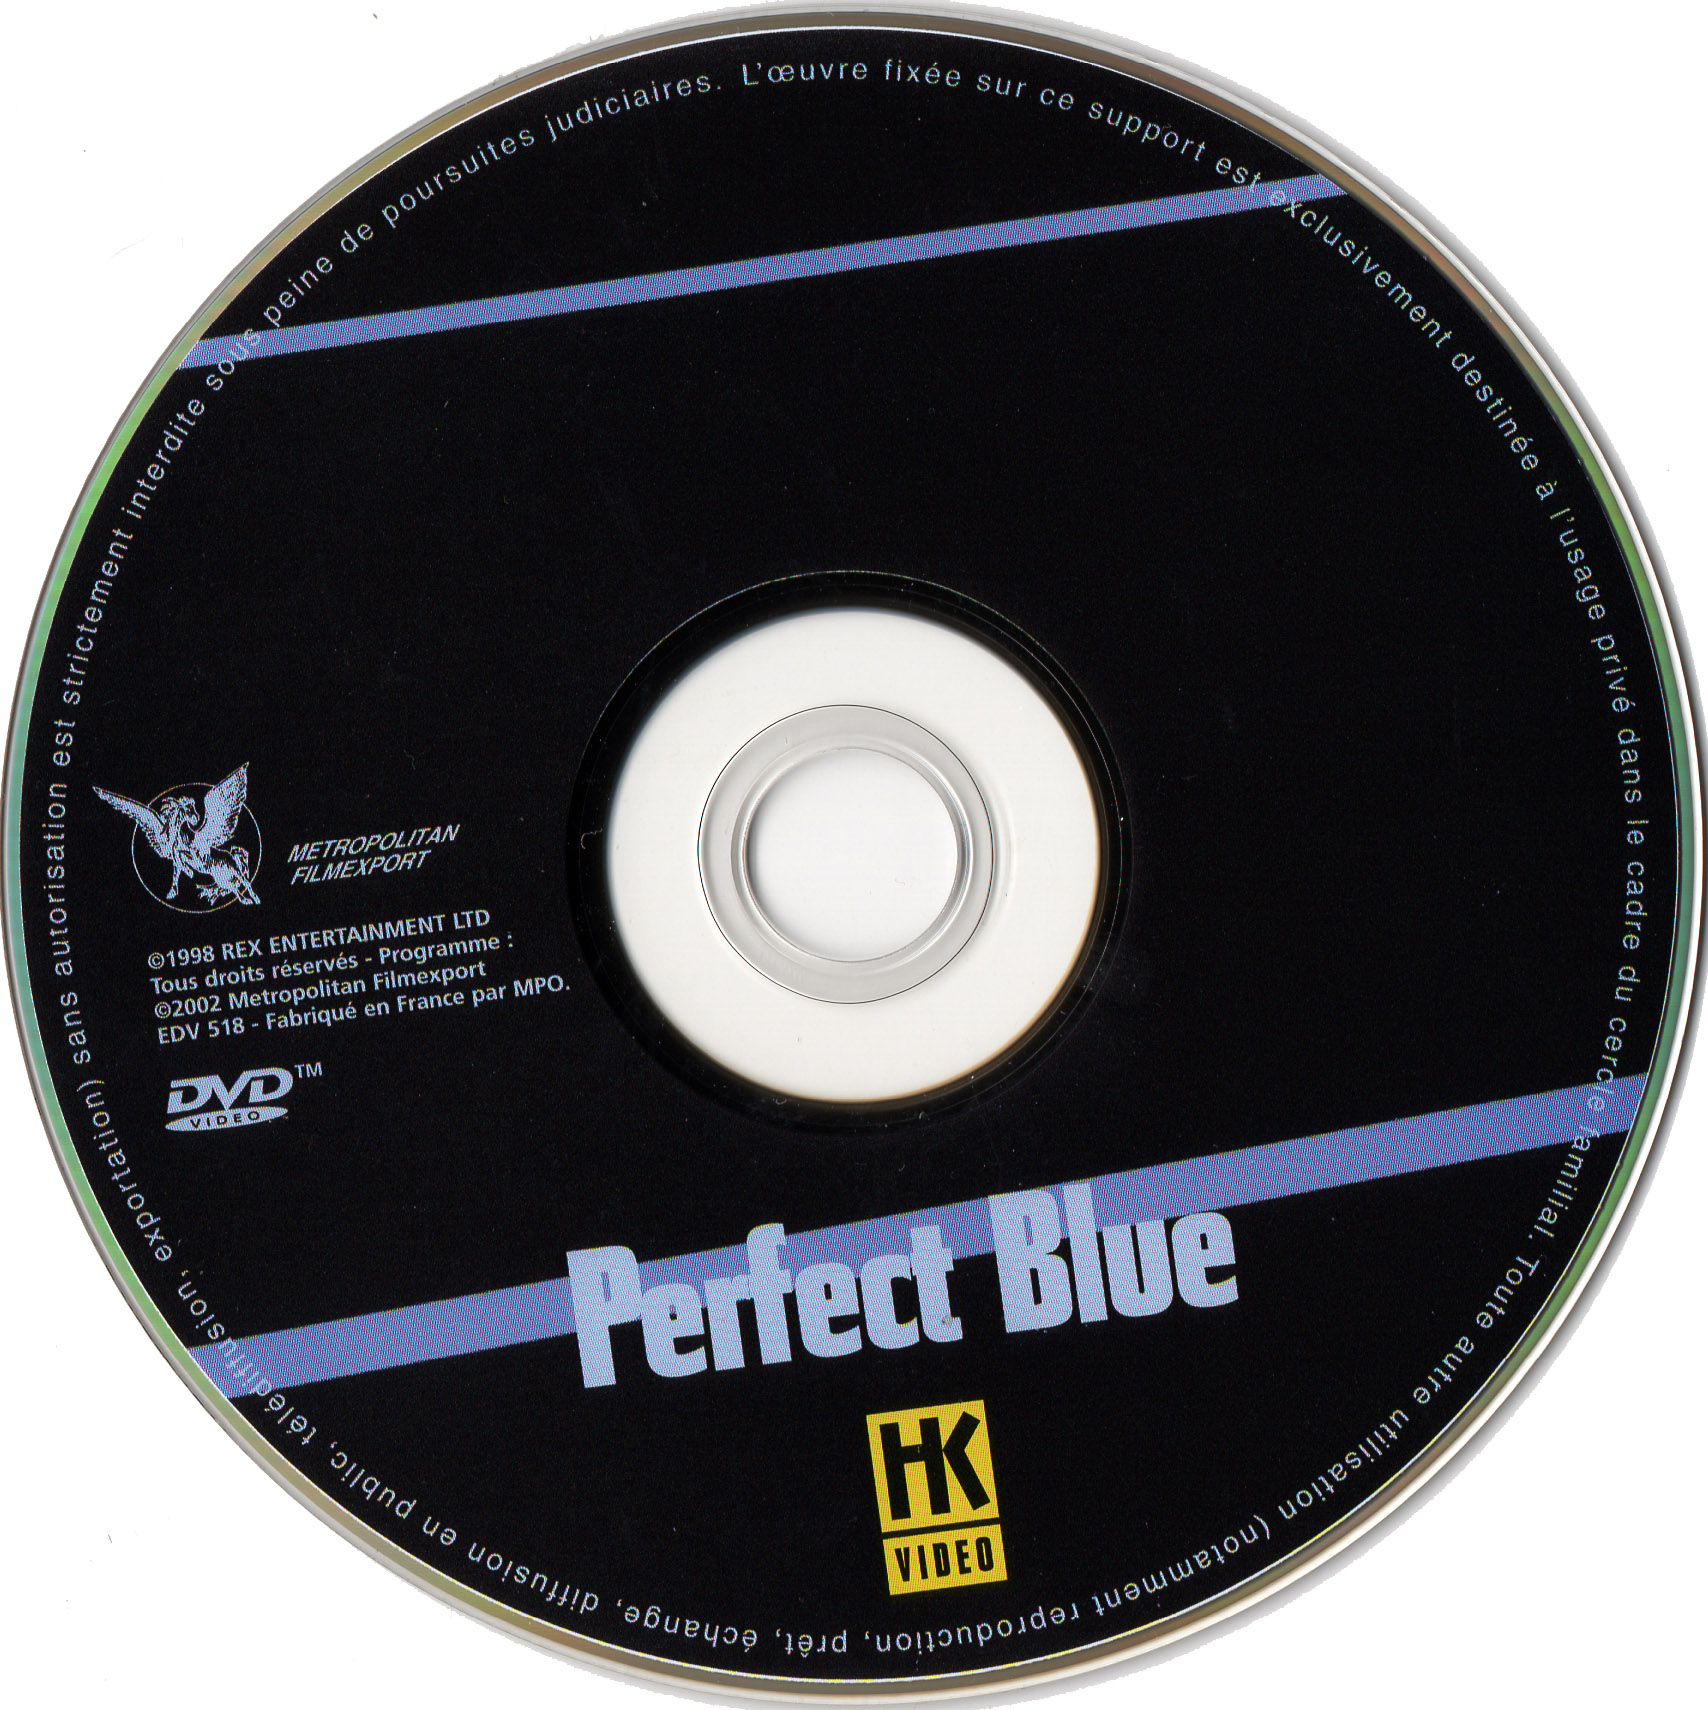 Perfect blue DISC 1